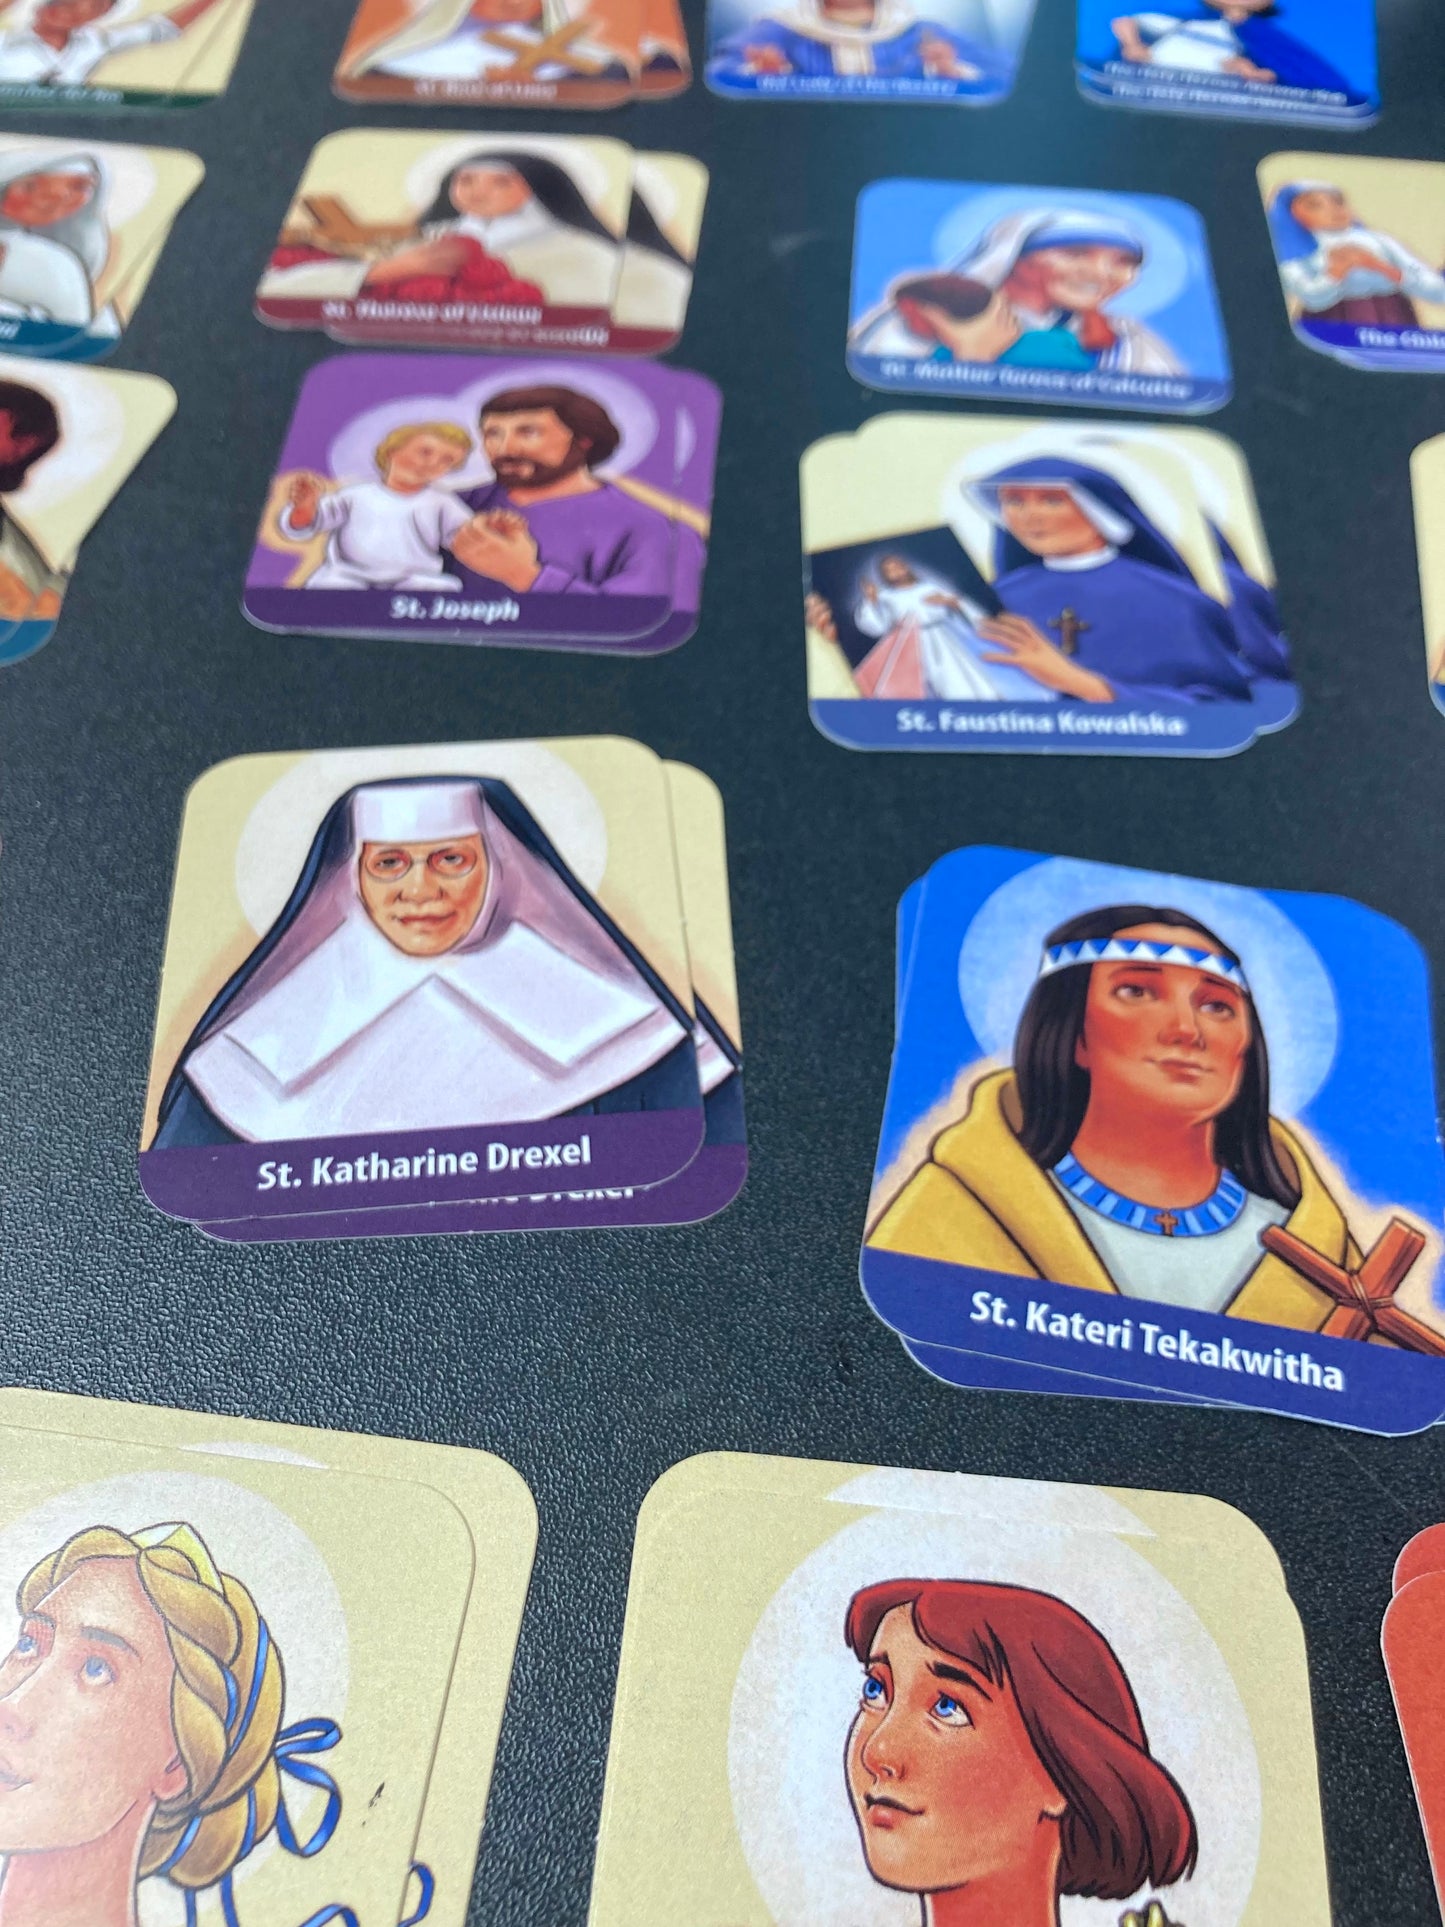 Holy Heroes Matching Game - Holy Heroes